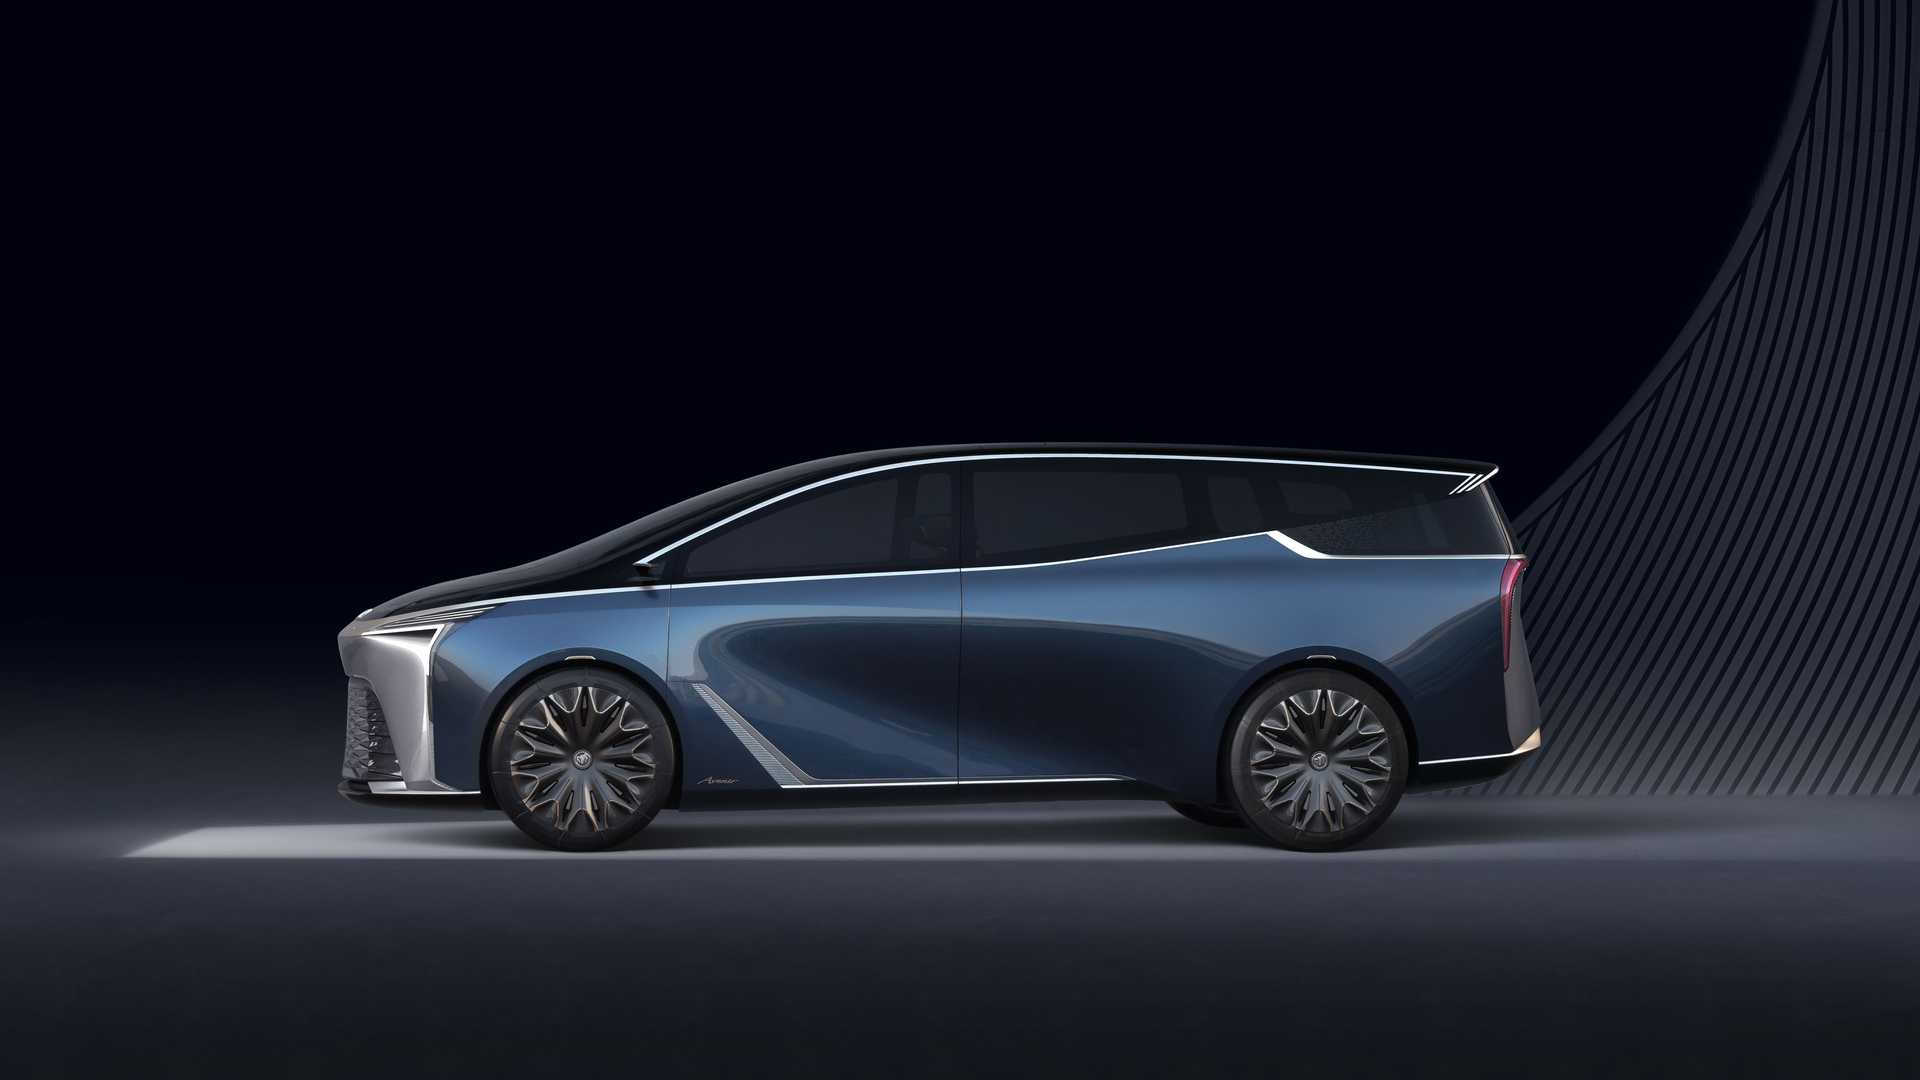 The Striking Flagship Concept by BUICK | The GL8 Concept